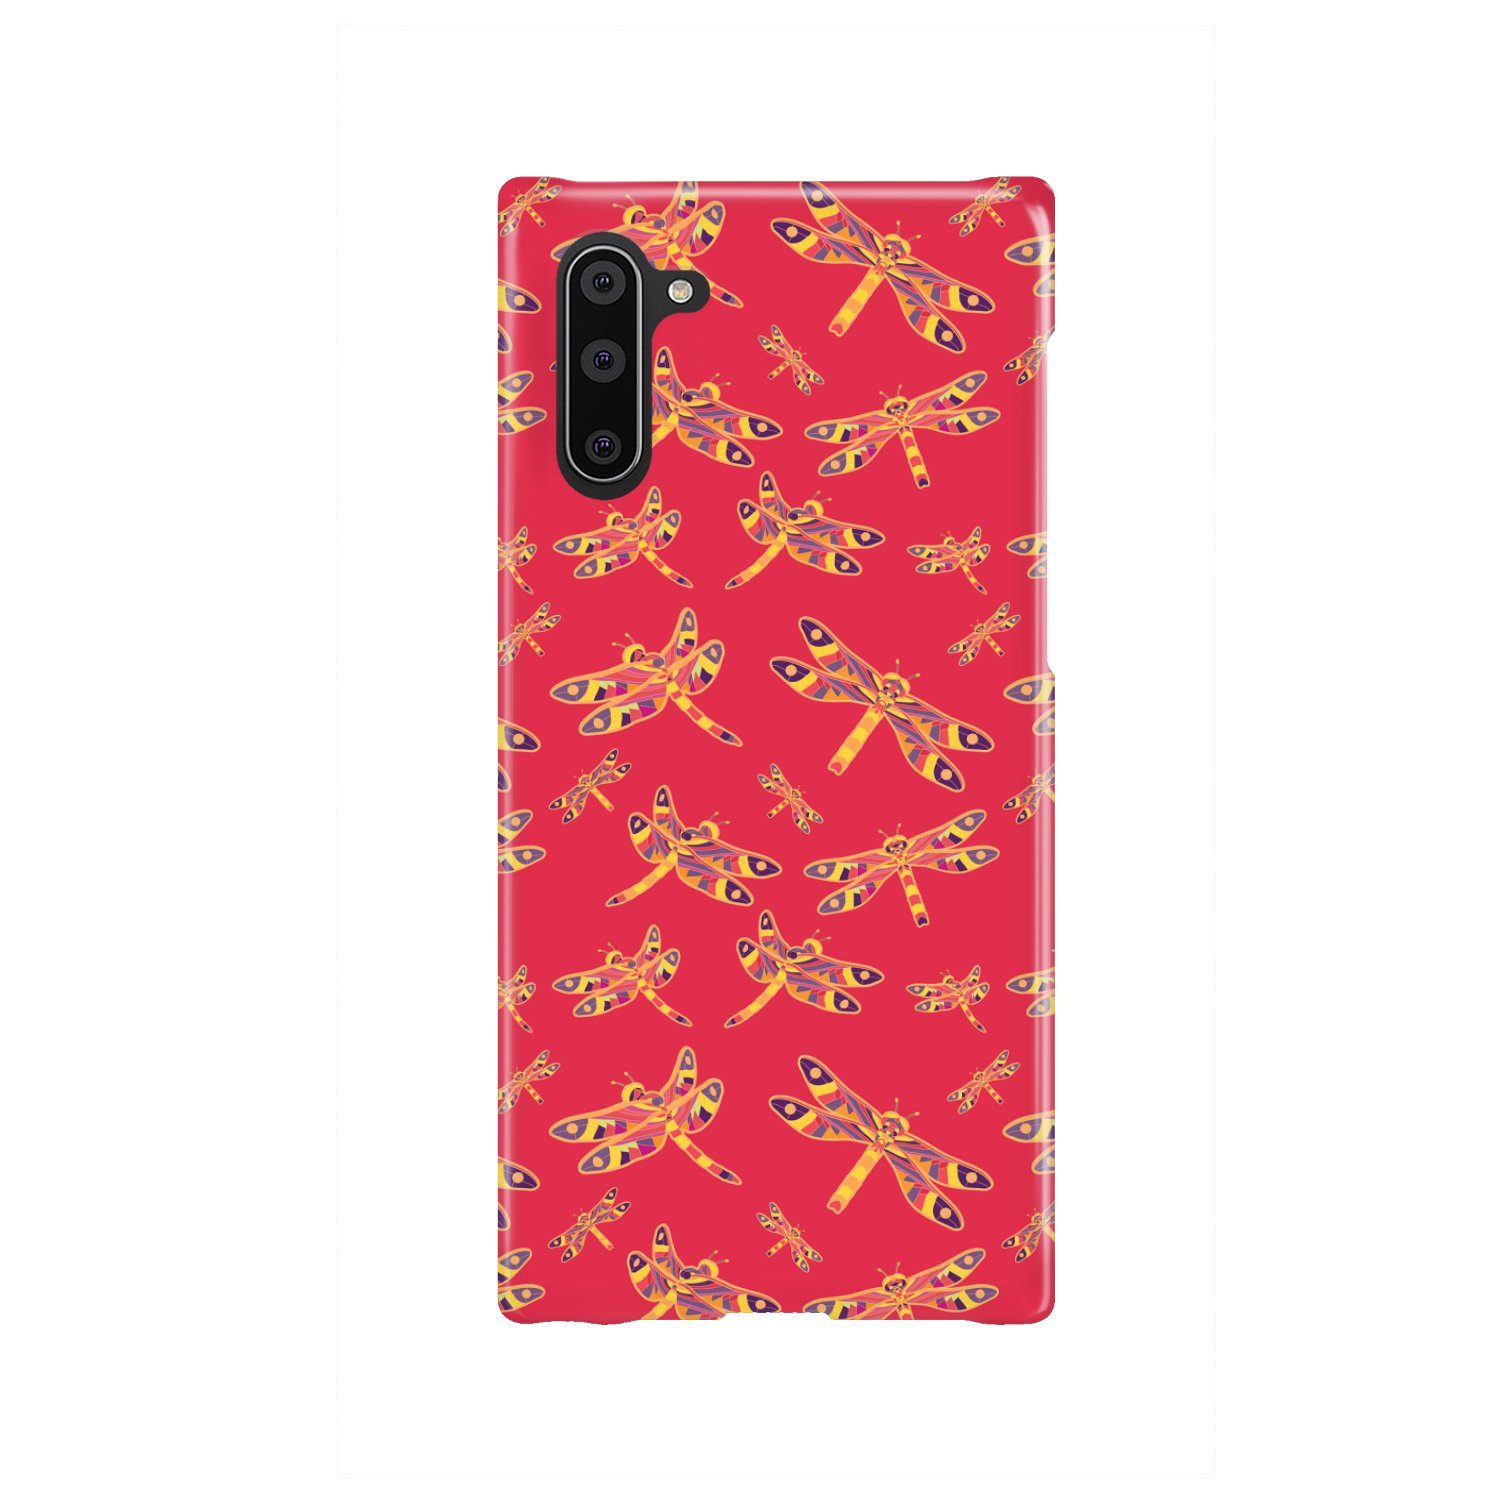 Gathering Rouge Phone Case Phone Case wc-fulfillment Samsung Galaxy Note 10 